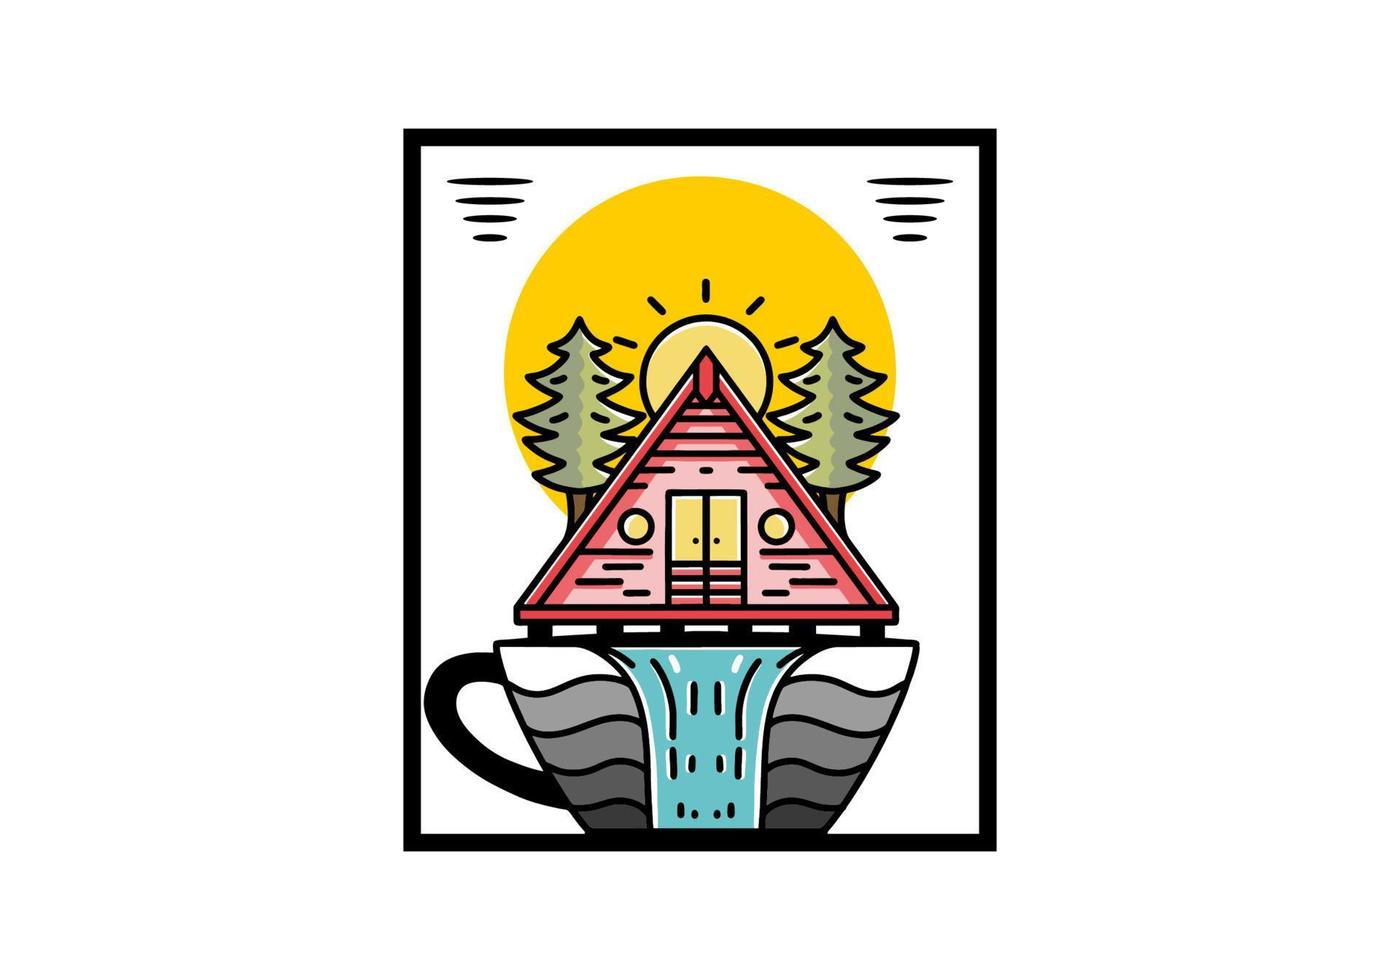 Wood cabin and pine trees on the coffee cup shape with waterfall illustration vector